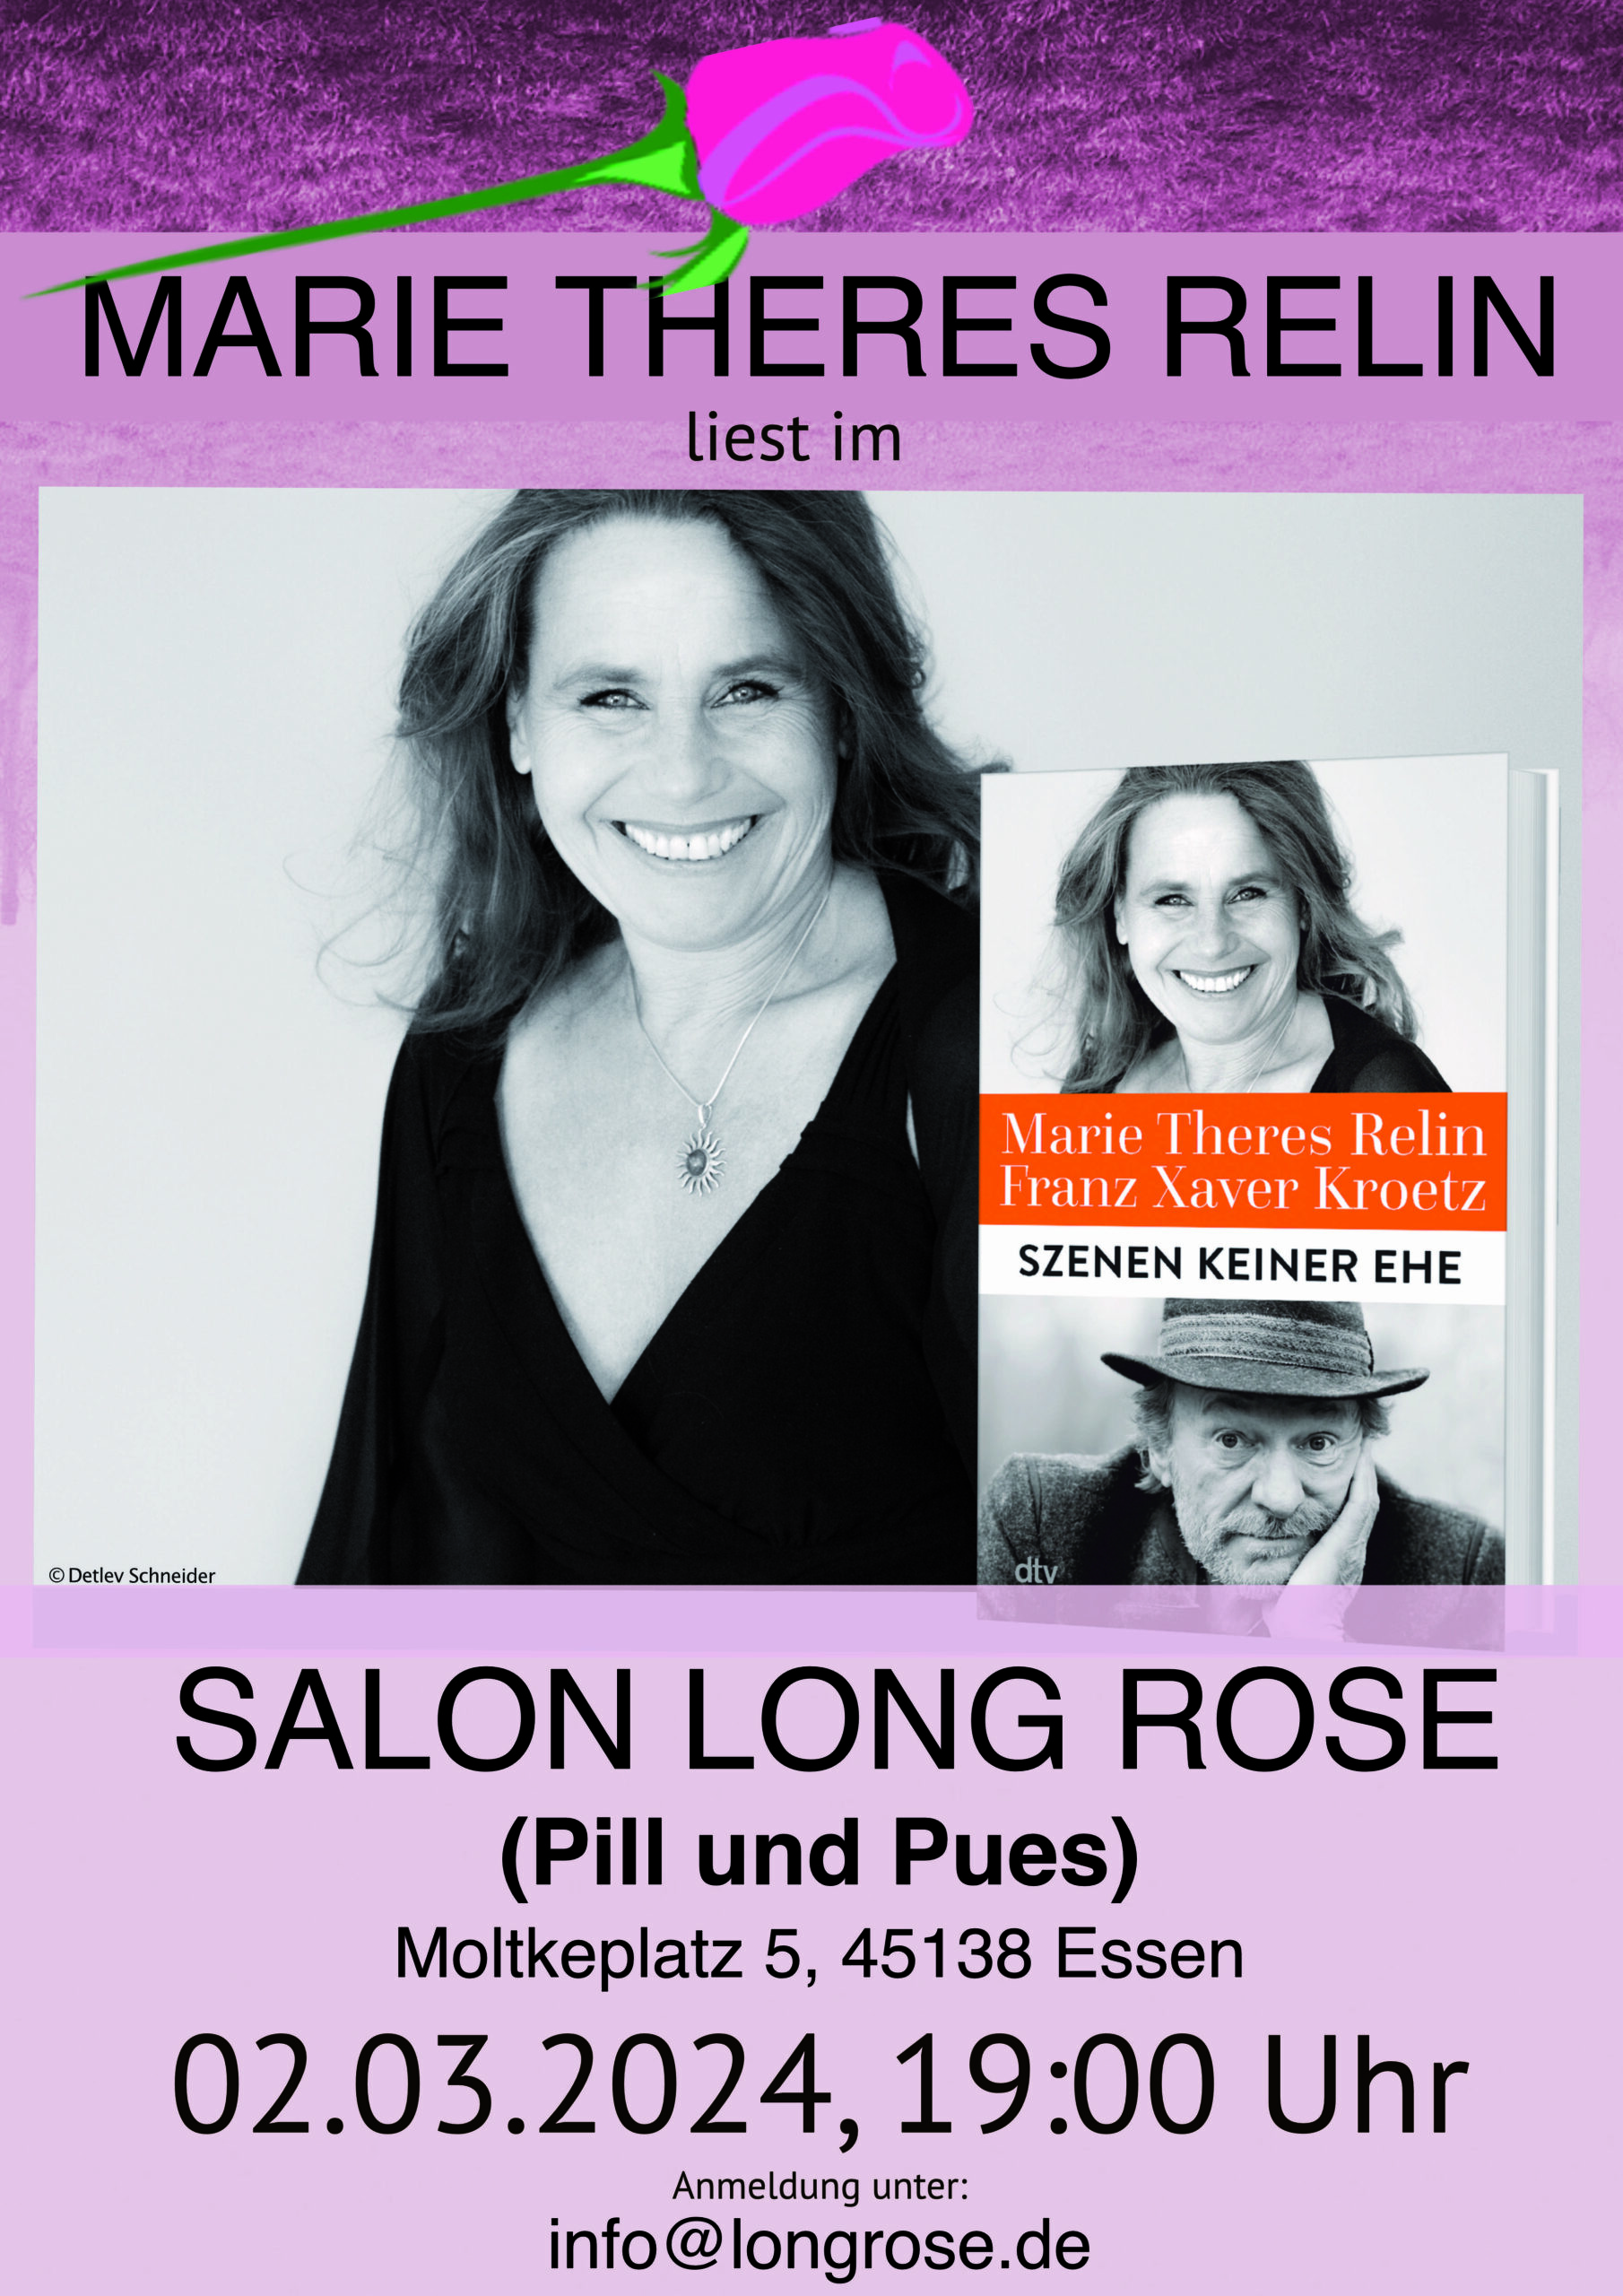 You are currently viewing Salon Long Rose – Pill und Pues, Essen – 02.03.2024